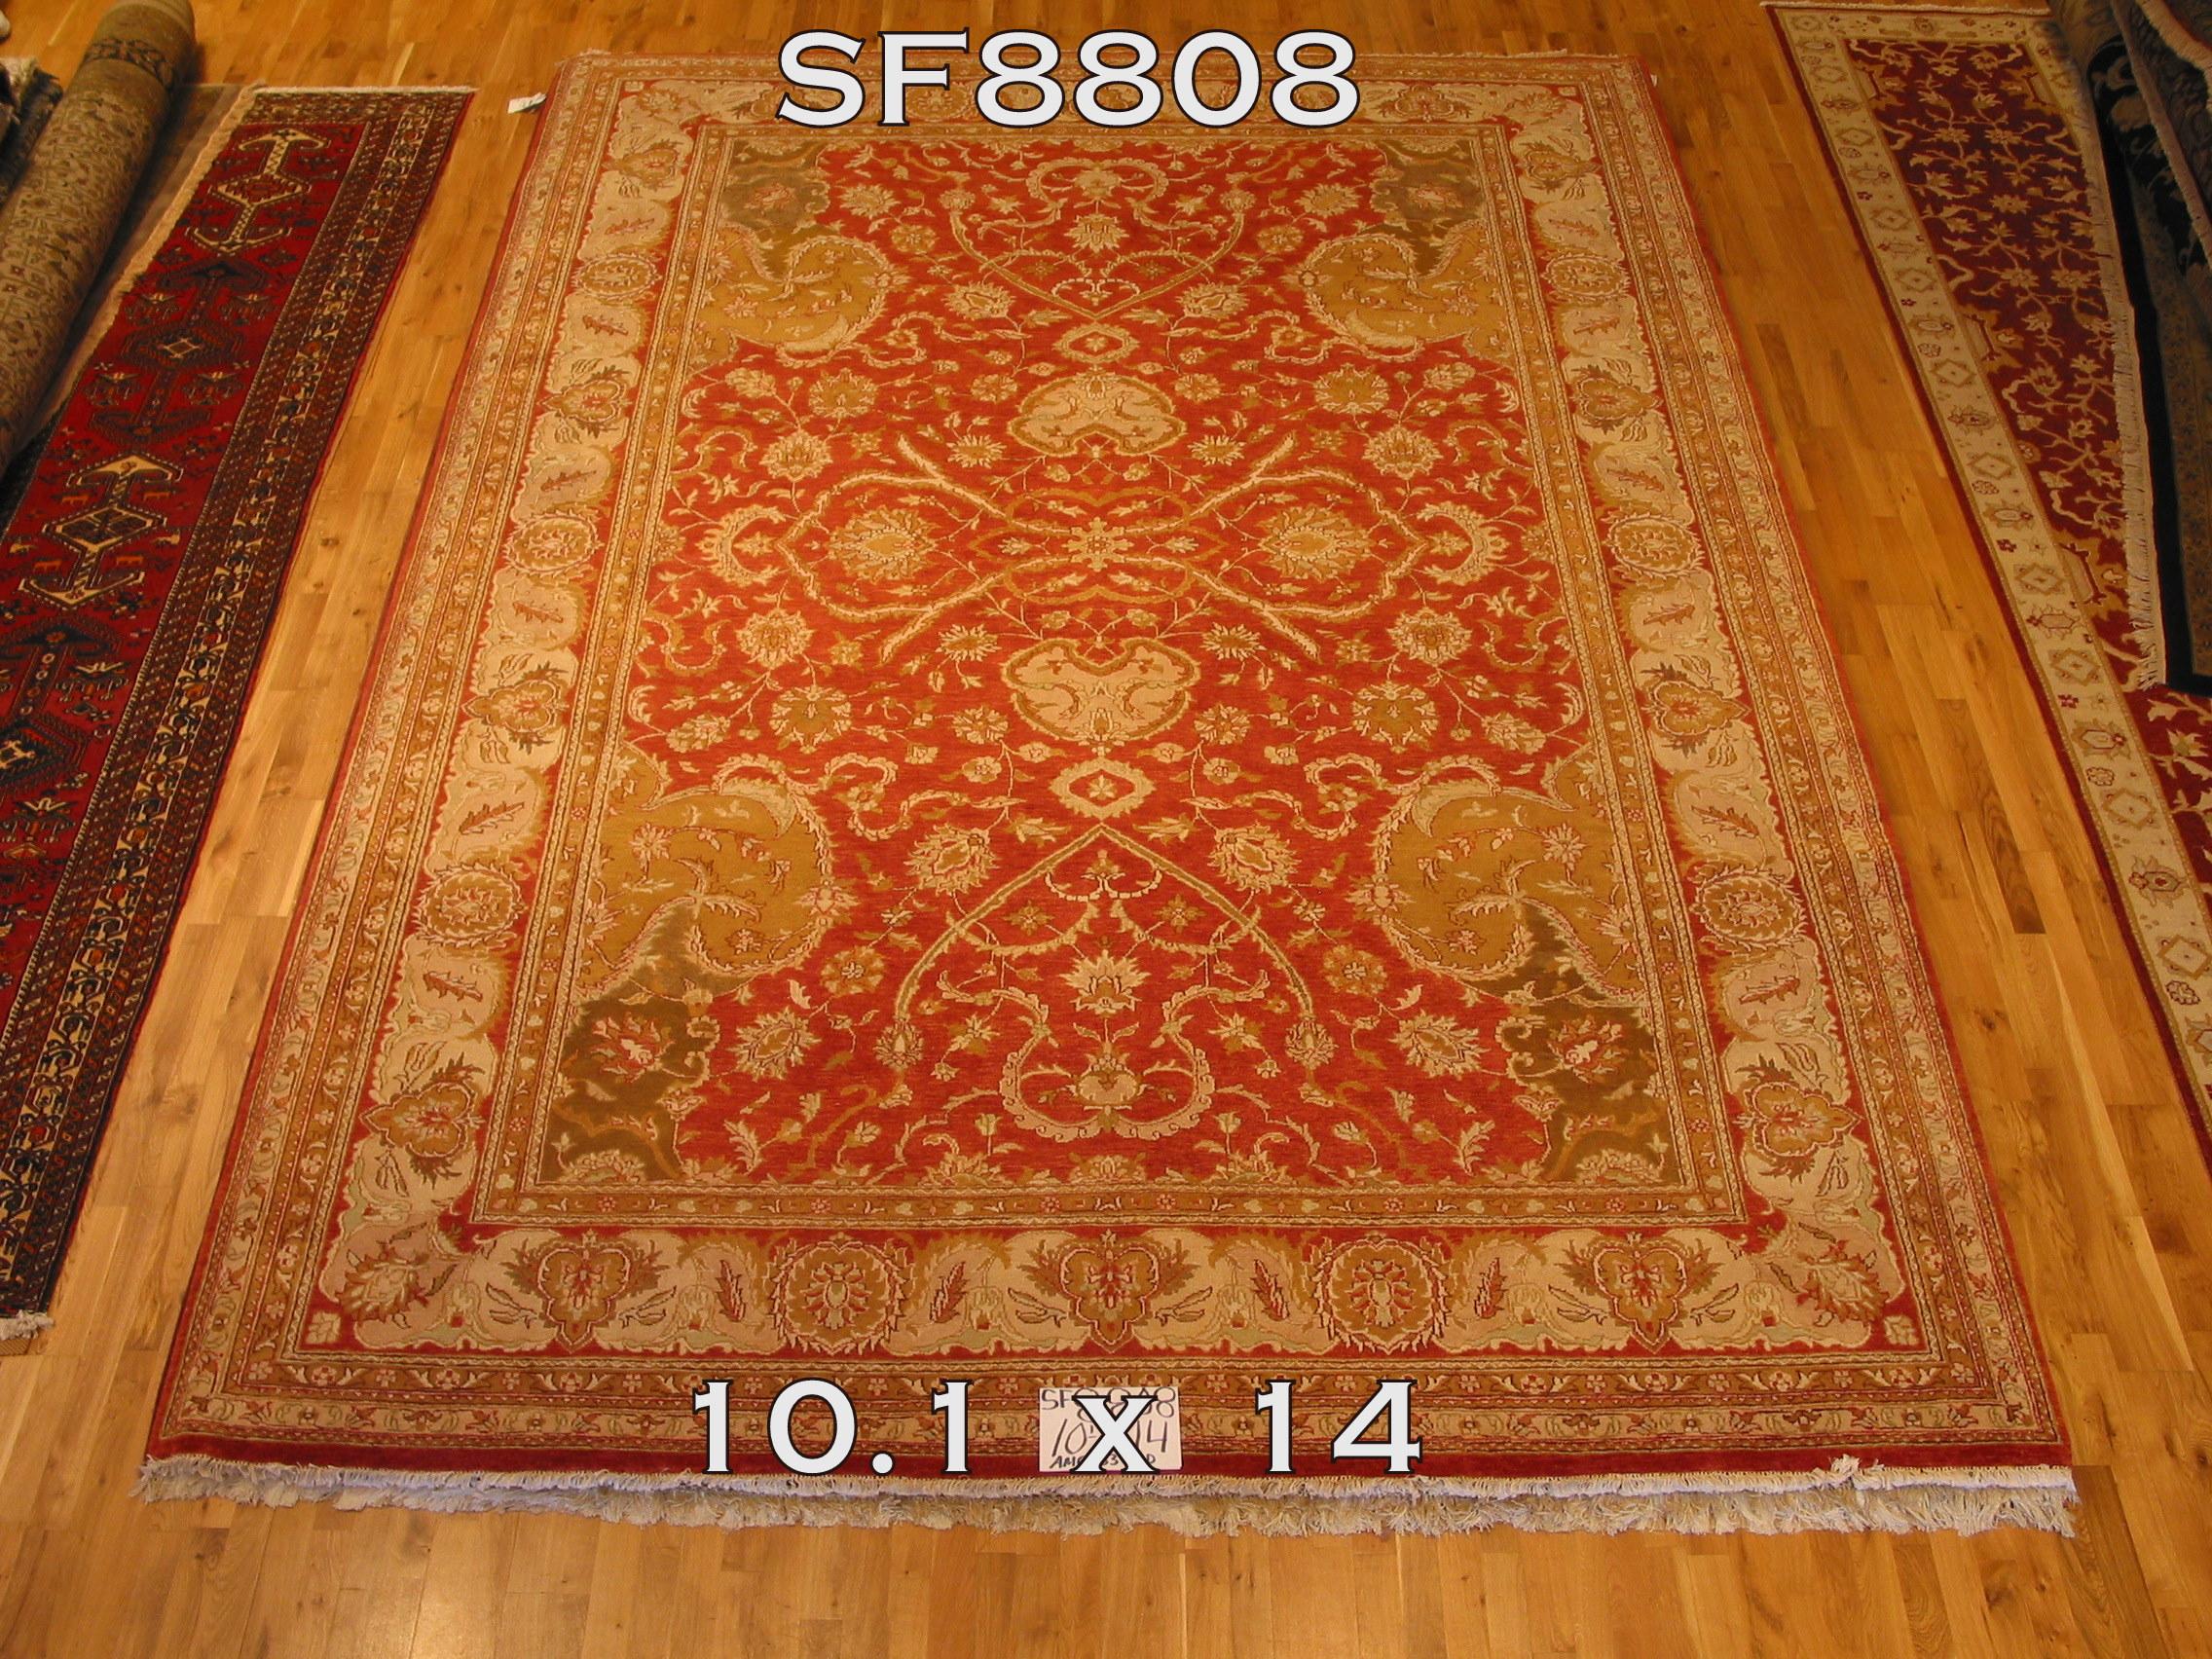 The intricate design of the bold red center panel gives this traditional style area rug its distinctive look. A succession of floral ribbons frame. An elegant and exciting look for the dining or living room.

Hand knotted wool. Handmade in India